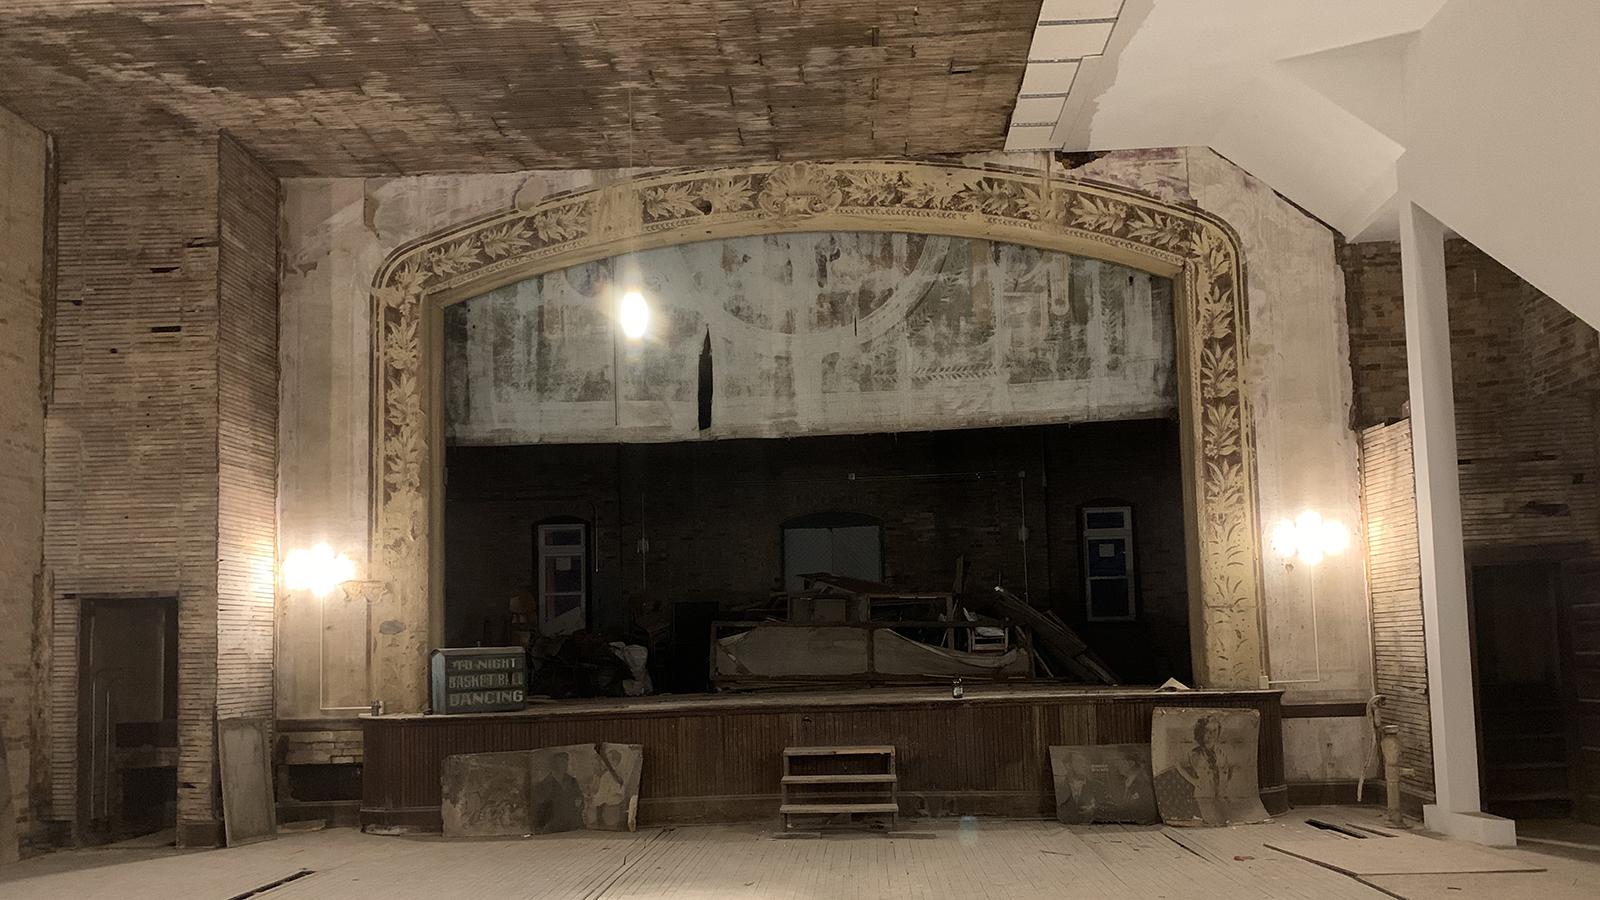 The main stage in process of renovation of the Tecumseh Theater in Shawnee, Ohio.